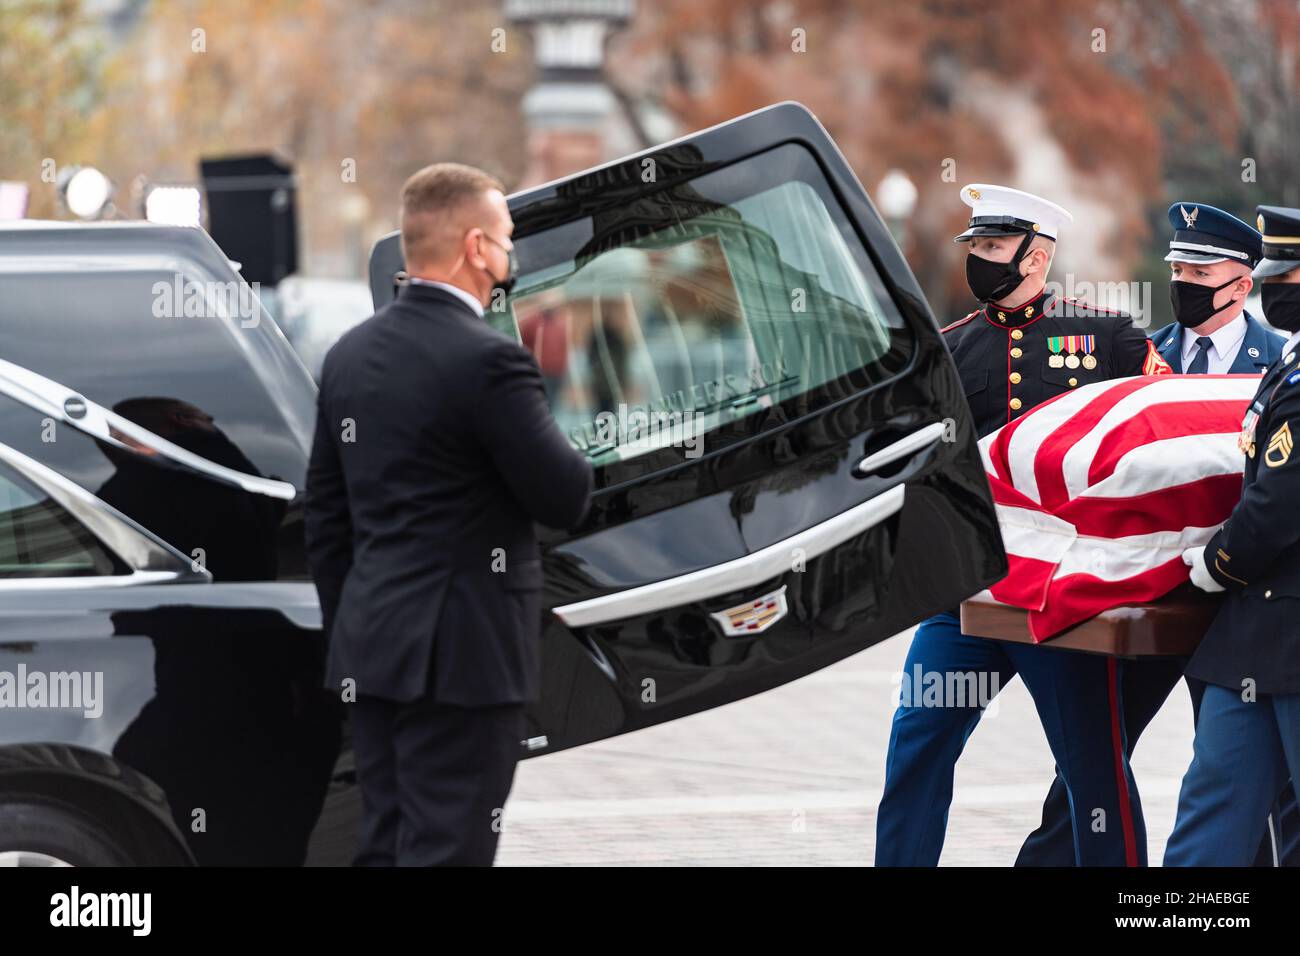 Washington, United States Of America. 10th Dec, 2021. Washington, United States of America. 10 December, 2021. An Armed Forces honor guard carry the remains of World War II veteran and former Senator Robert Dole to a hearse as they depart the U.S. Capitol, December 10, 2021 in Washington, DC Senator Dole died at age 98 following a lifetime of service to the nation. Credit: Sgt. Zachery Perkins/U.S. Army/Alamy Live News Stock Photo